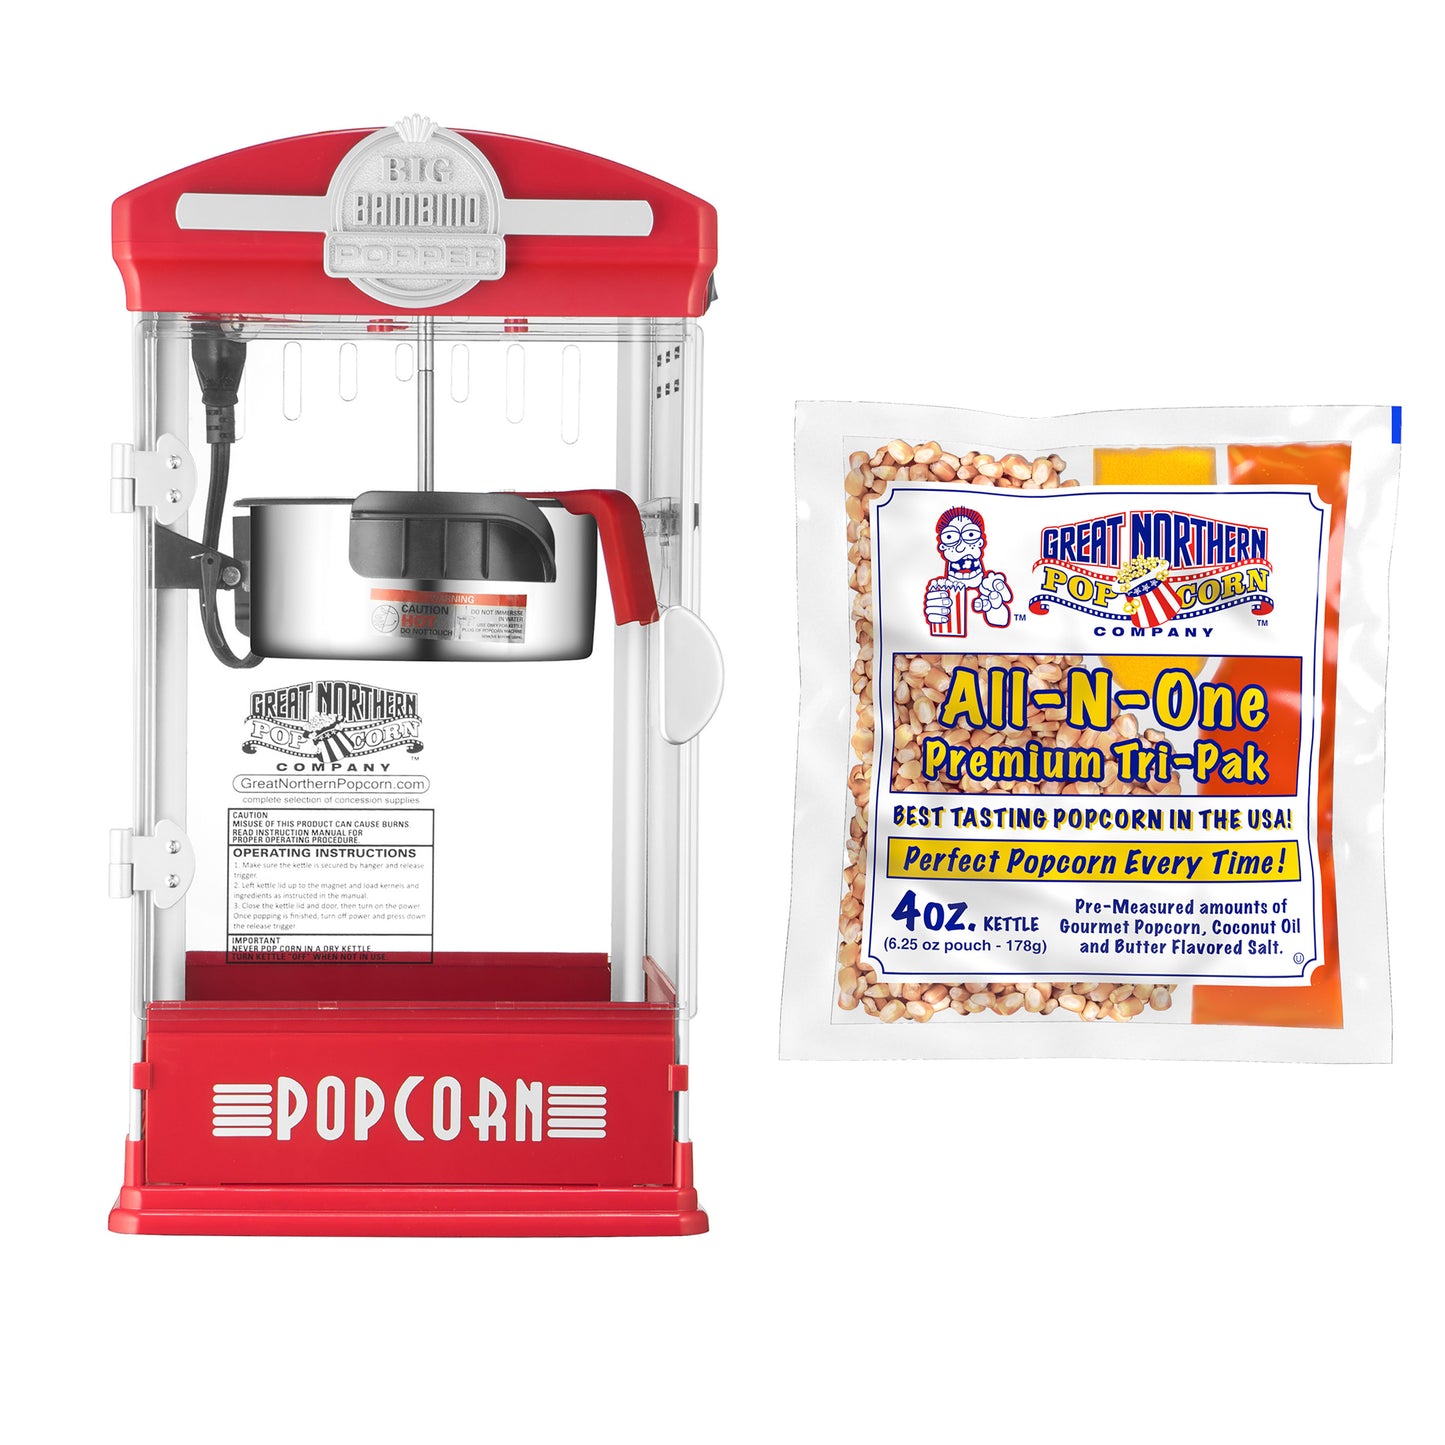 Big Bambino Popcorn Machine with 4 Ounce Kettle and 12 Pack of All-In-One Popcorn Kernel Packets  - Red